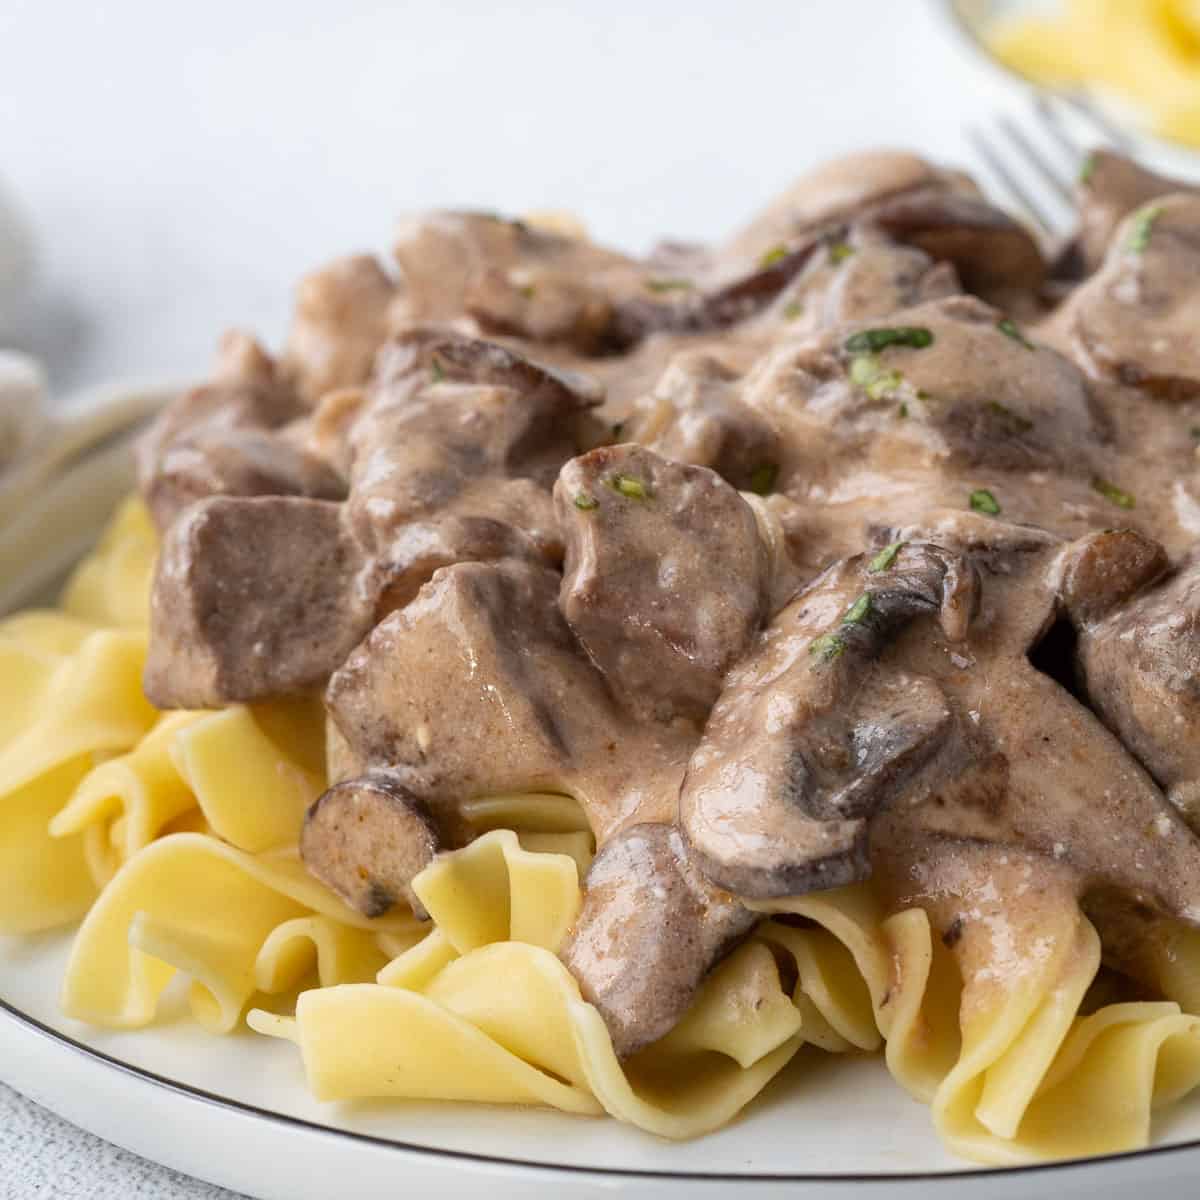 cream of mushroom beef stroganoff with mushrooms on a bed of egg noodles on a white plate.